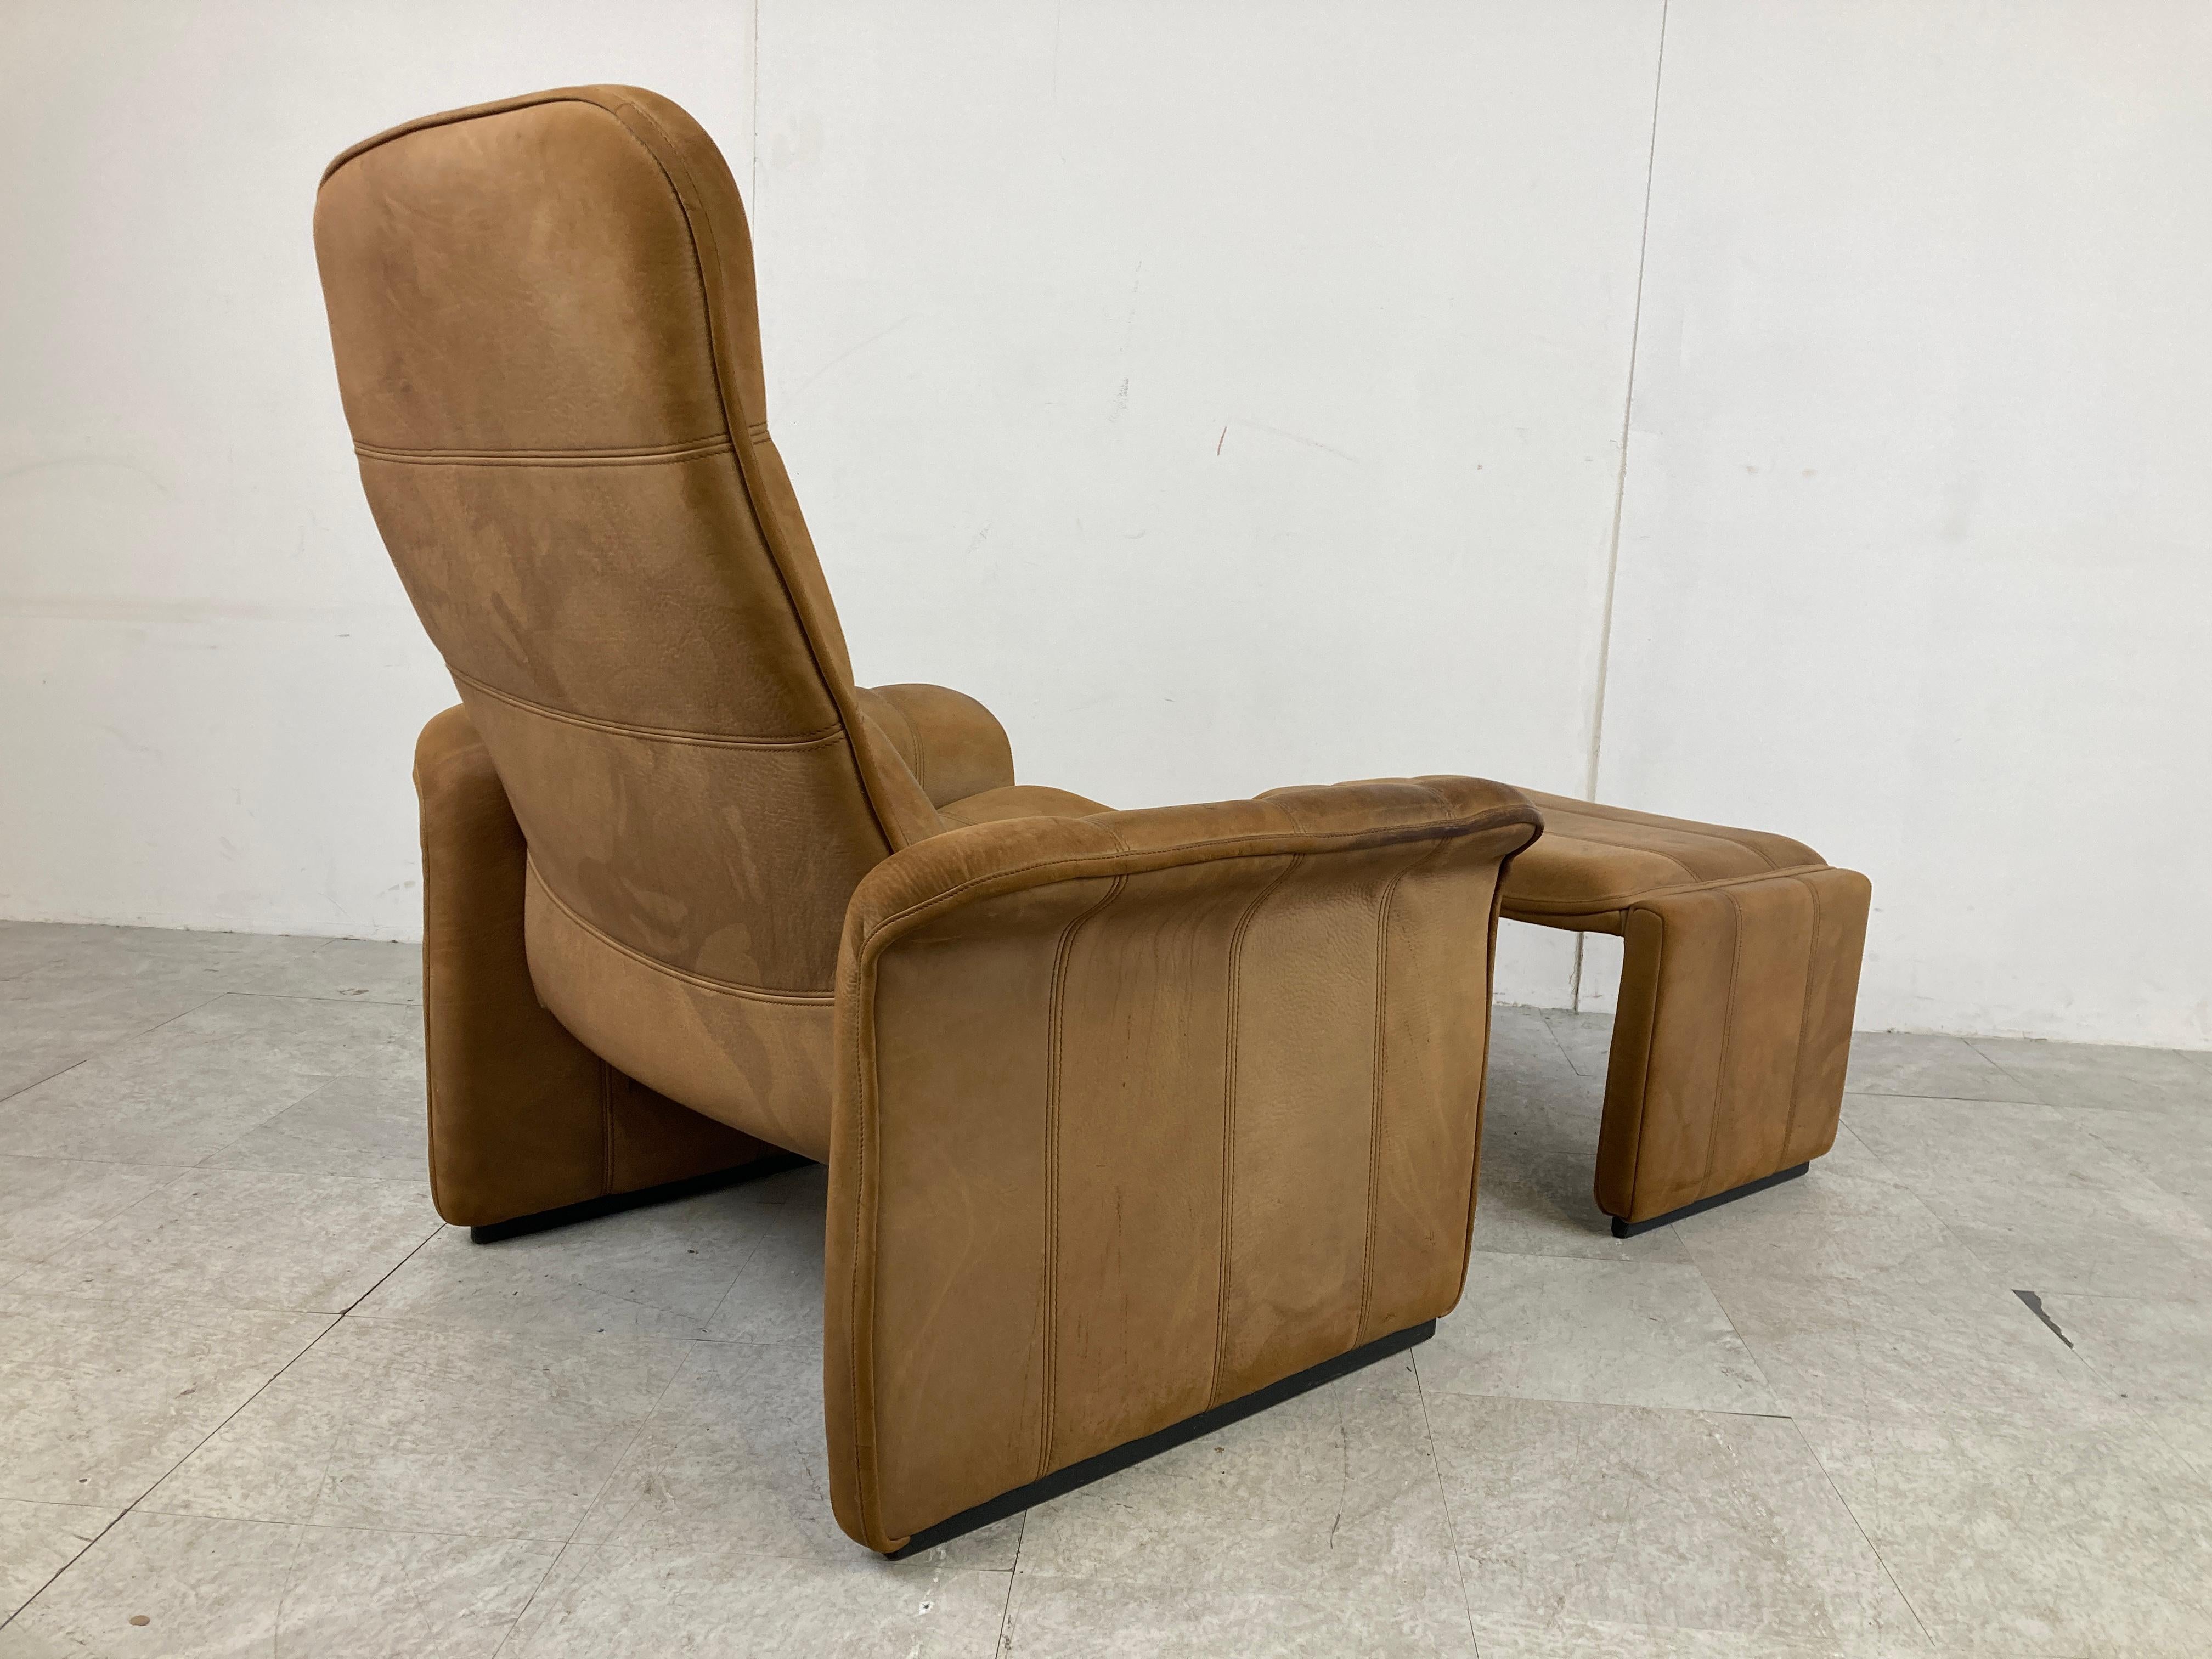 Mid-Century Modern leather armchair model DS50 with ottoman by Desede.

This beautiful buffalo leather armchair is pure quality and has a adjustable backrest.

Good condition.

1970s - Switzerland

Dimensions:
H 37.01 in. x W 33.86 in. x D